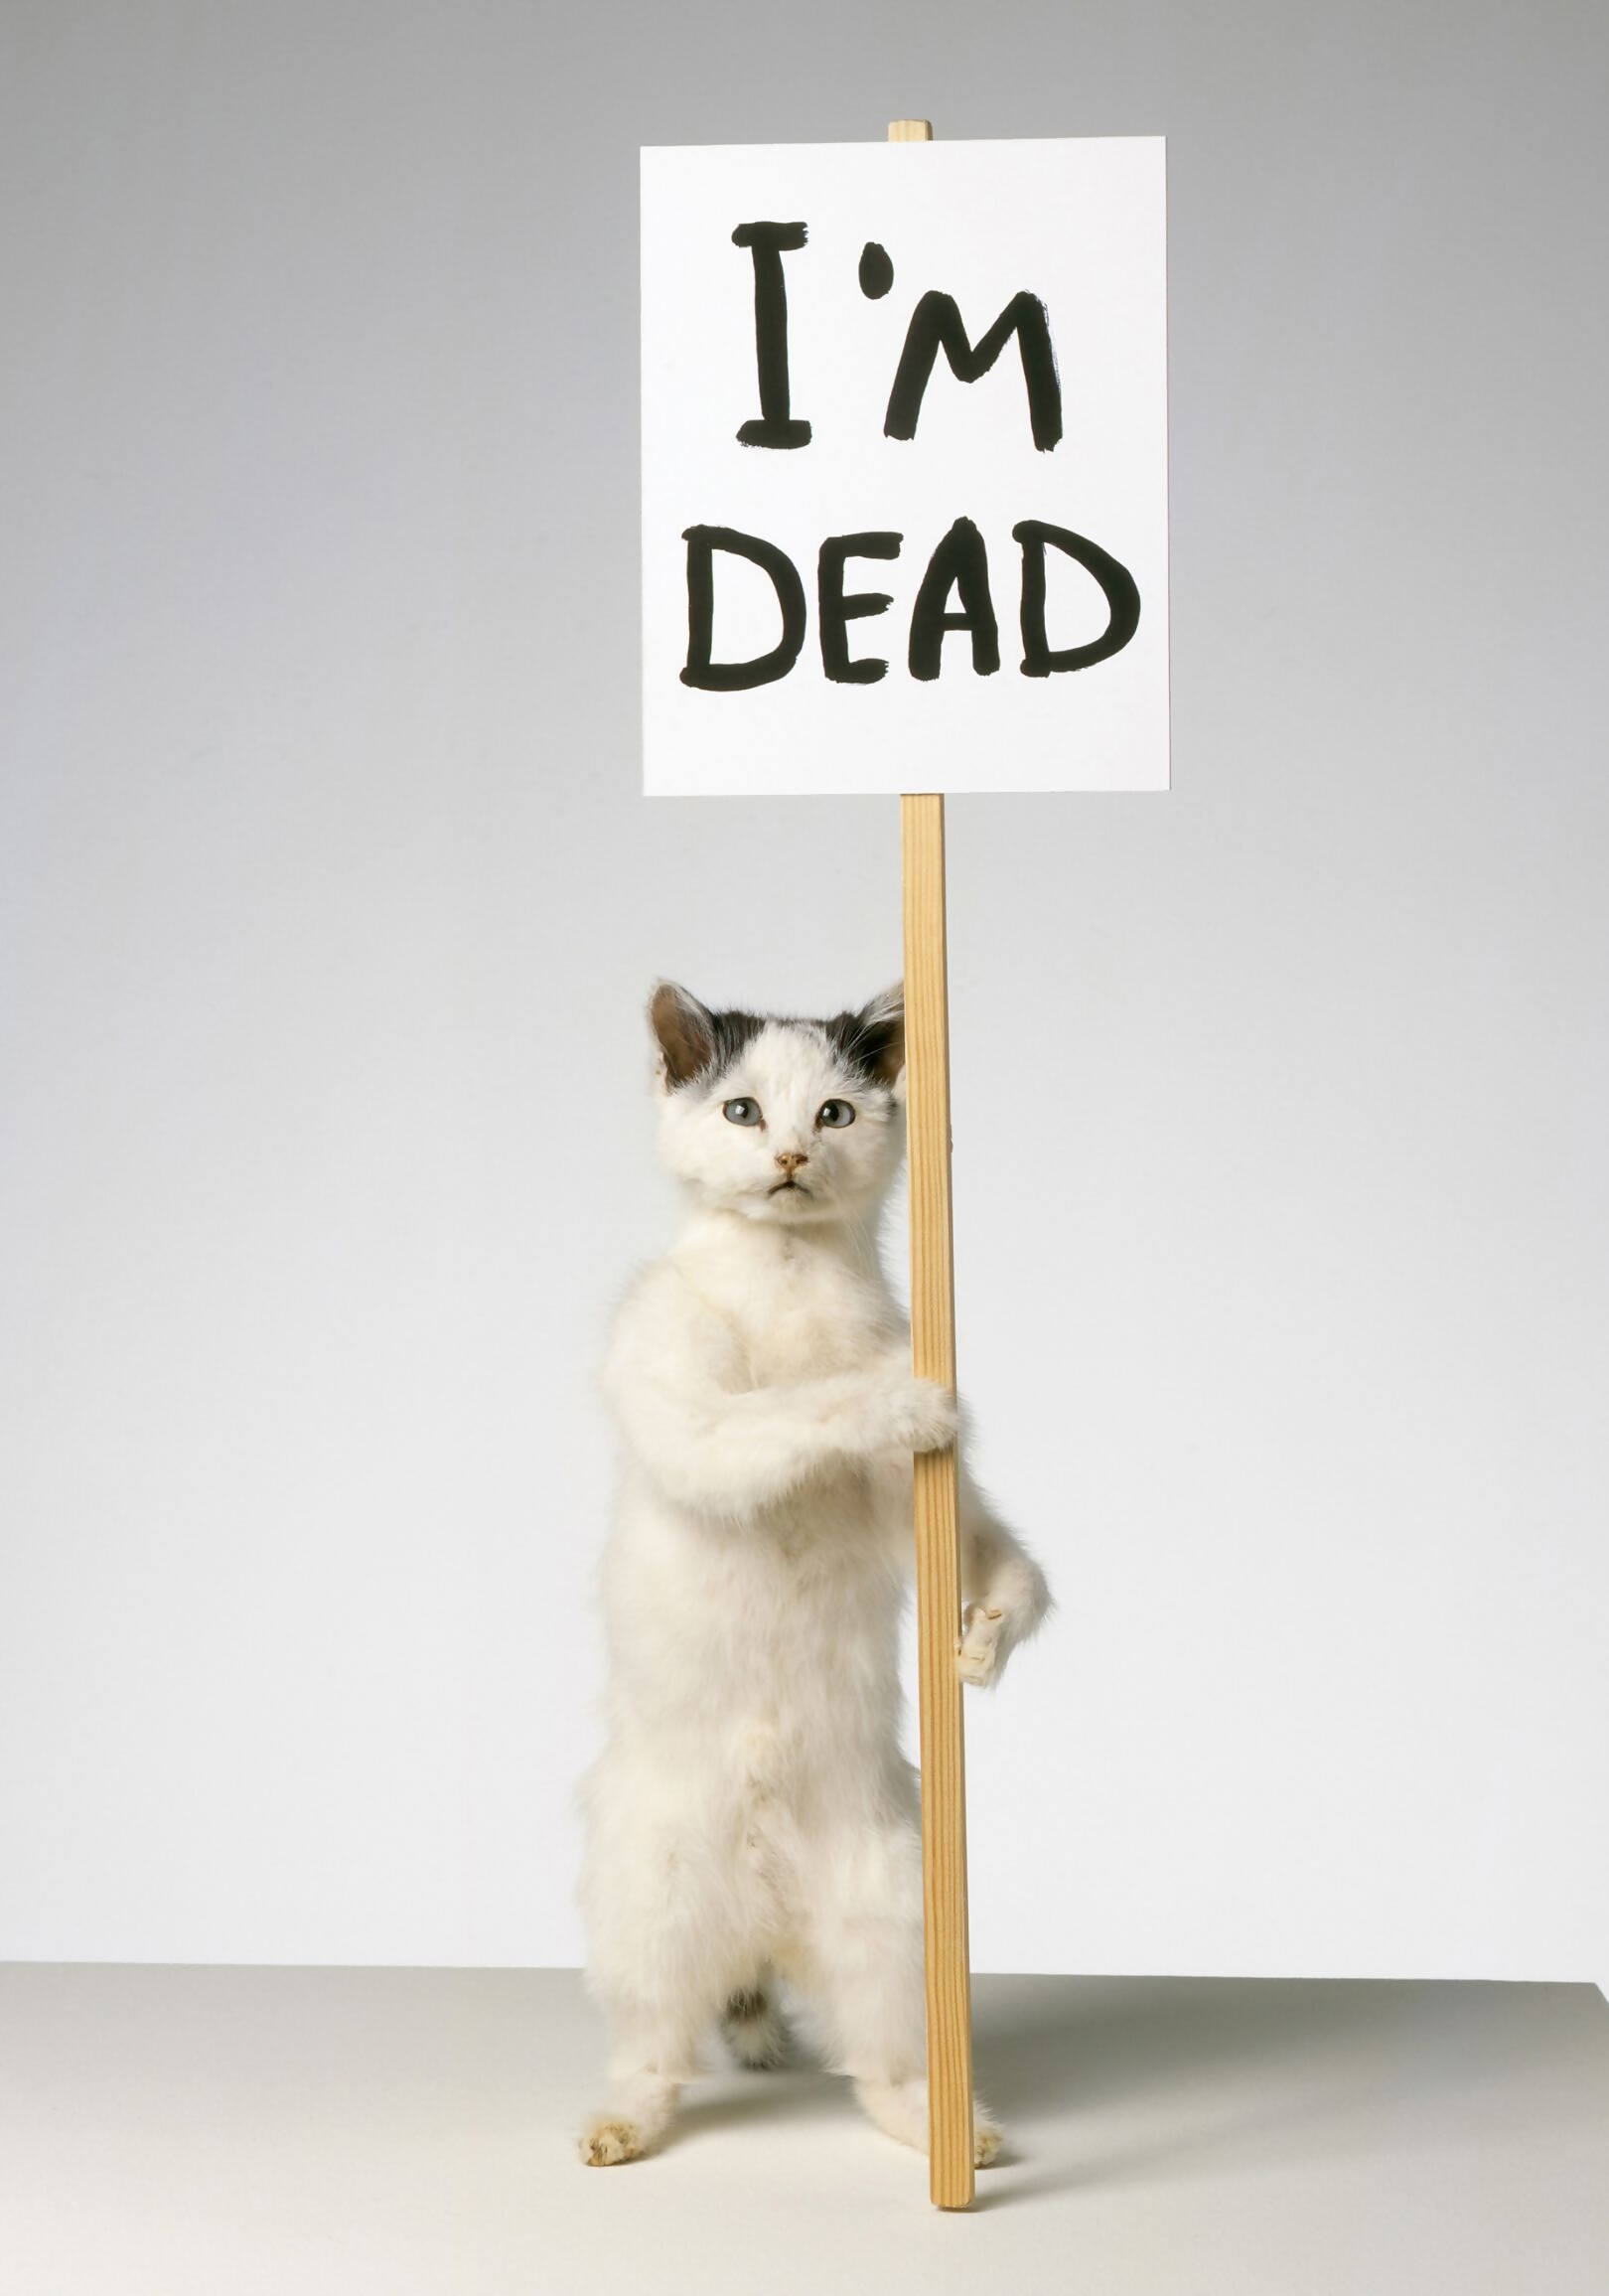 2. David Shrigley, I'm Dead, 2007, (c) David Shrigley. Courtesy the artist, The David and Indrė Roberts Collection and Stephen Friedman Gallery, London.